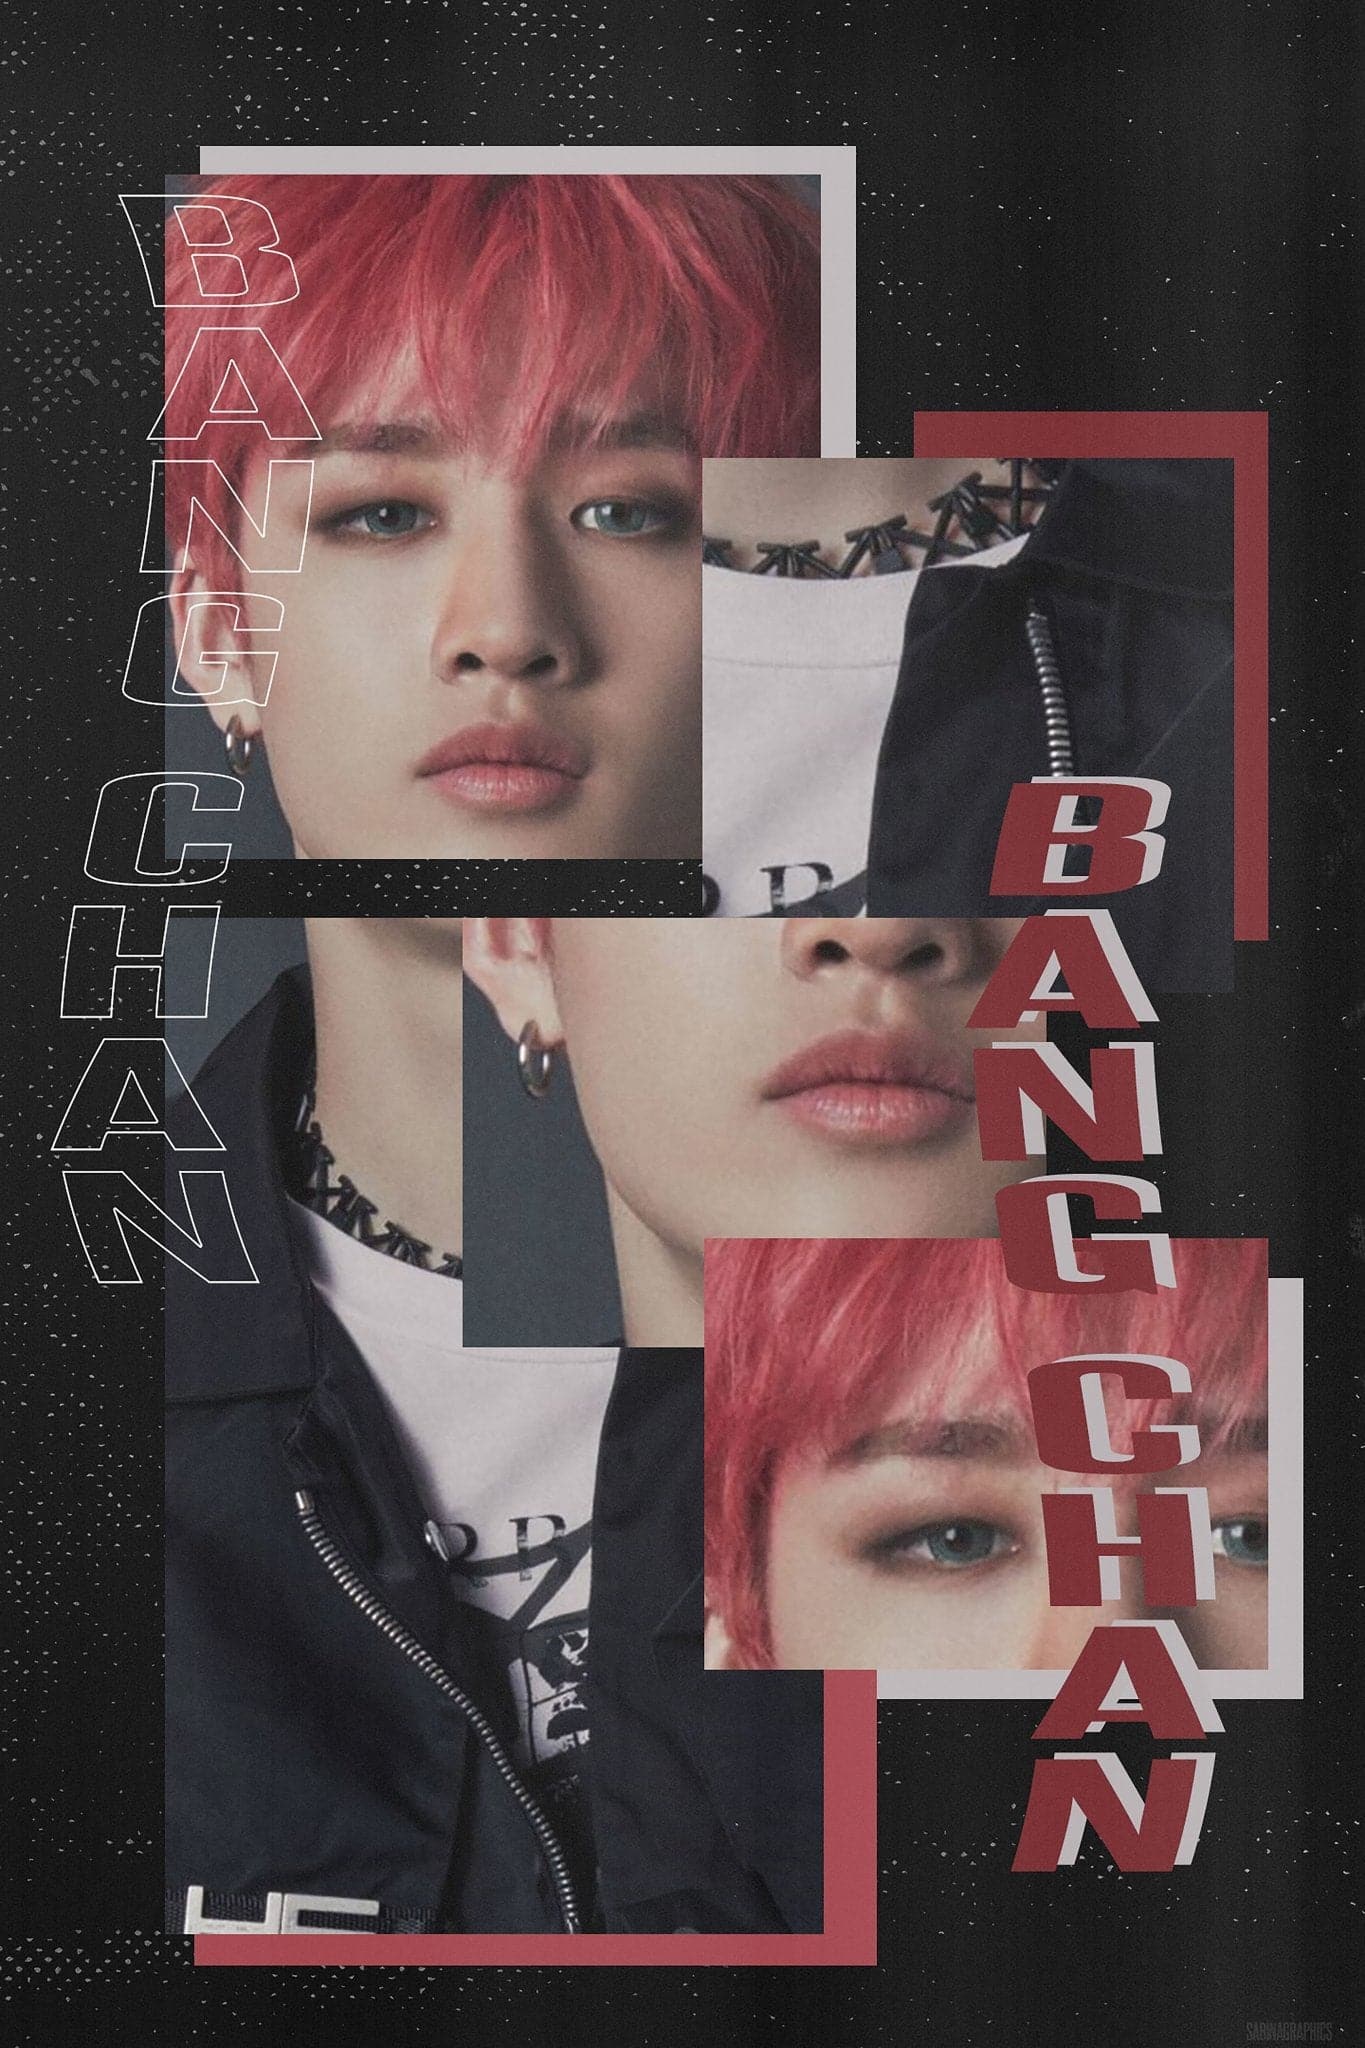 A black background with red and white squares. Each square has a picture of a member of the Bangtan Boys with red hair and bangs. - Bang Chan